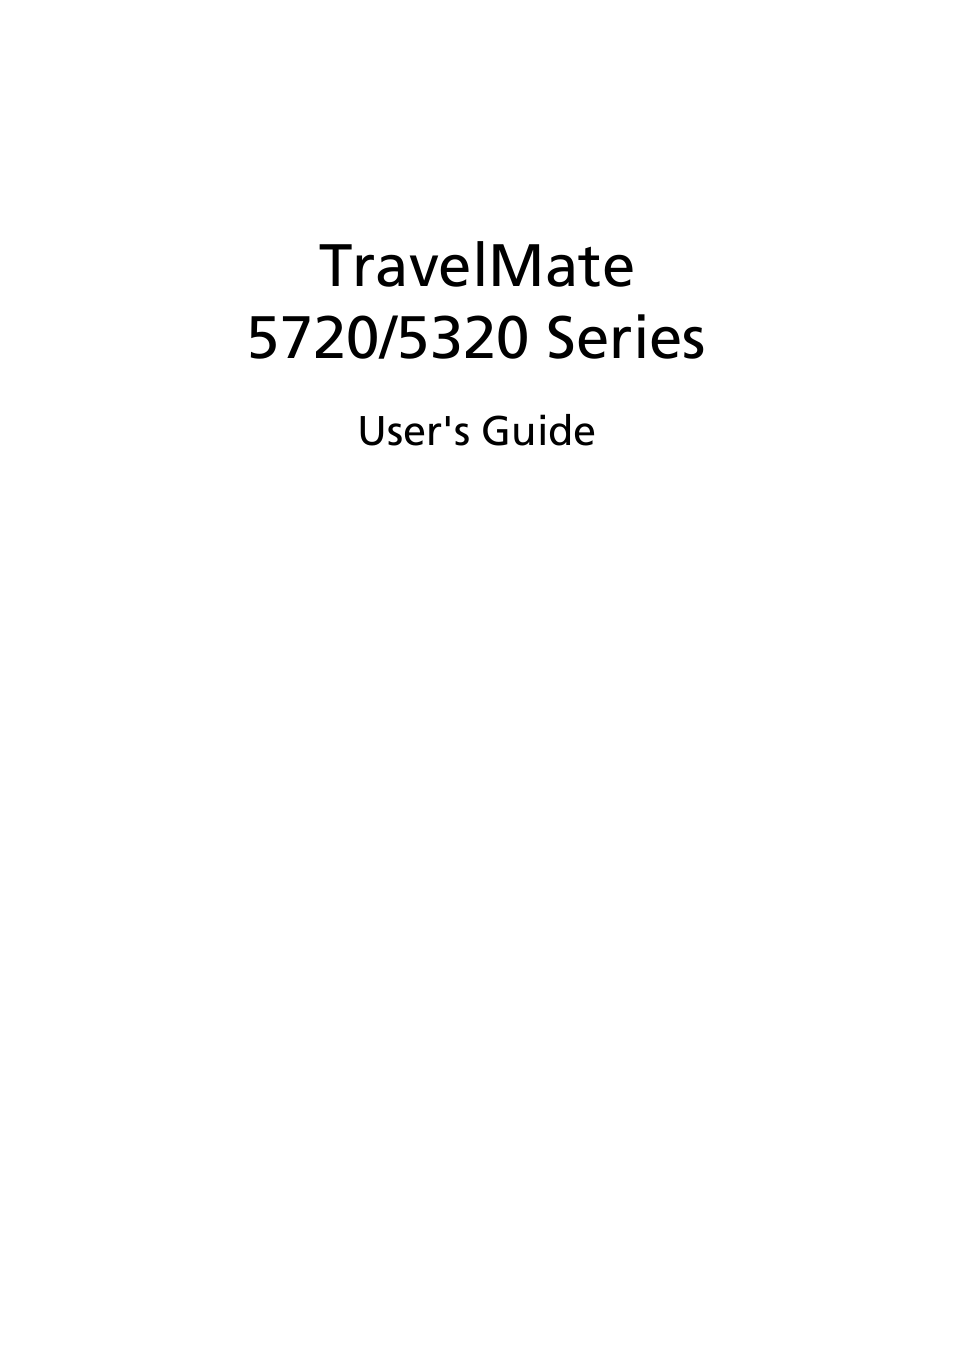 Acer TravelMate 5720 User Manual | 96 pages | Also for: TravelMate 5320